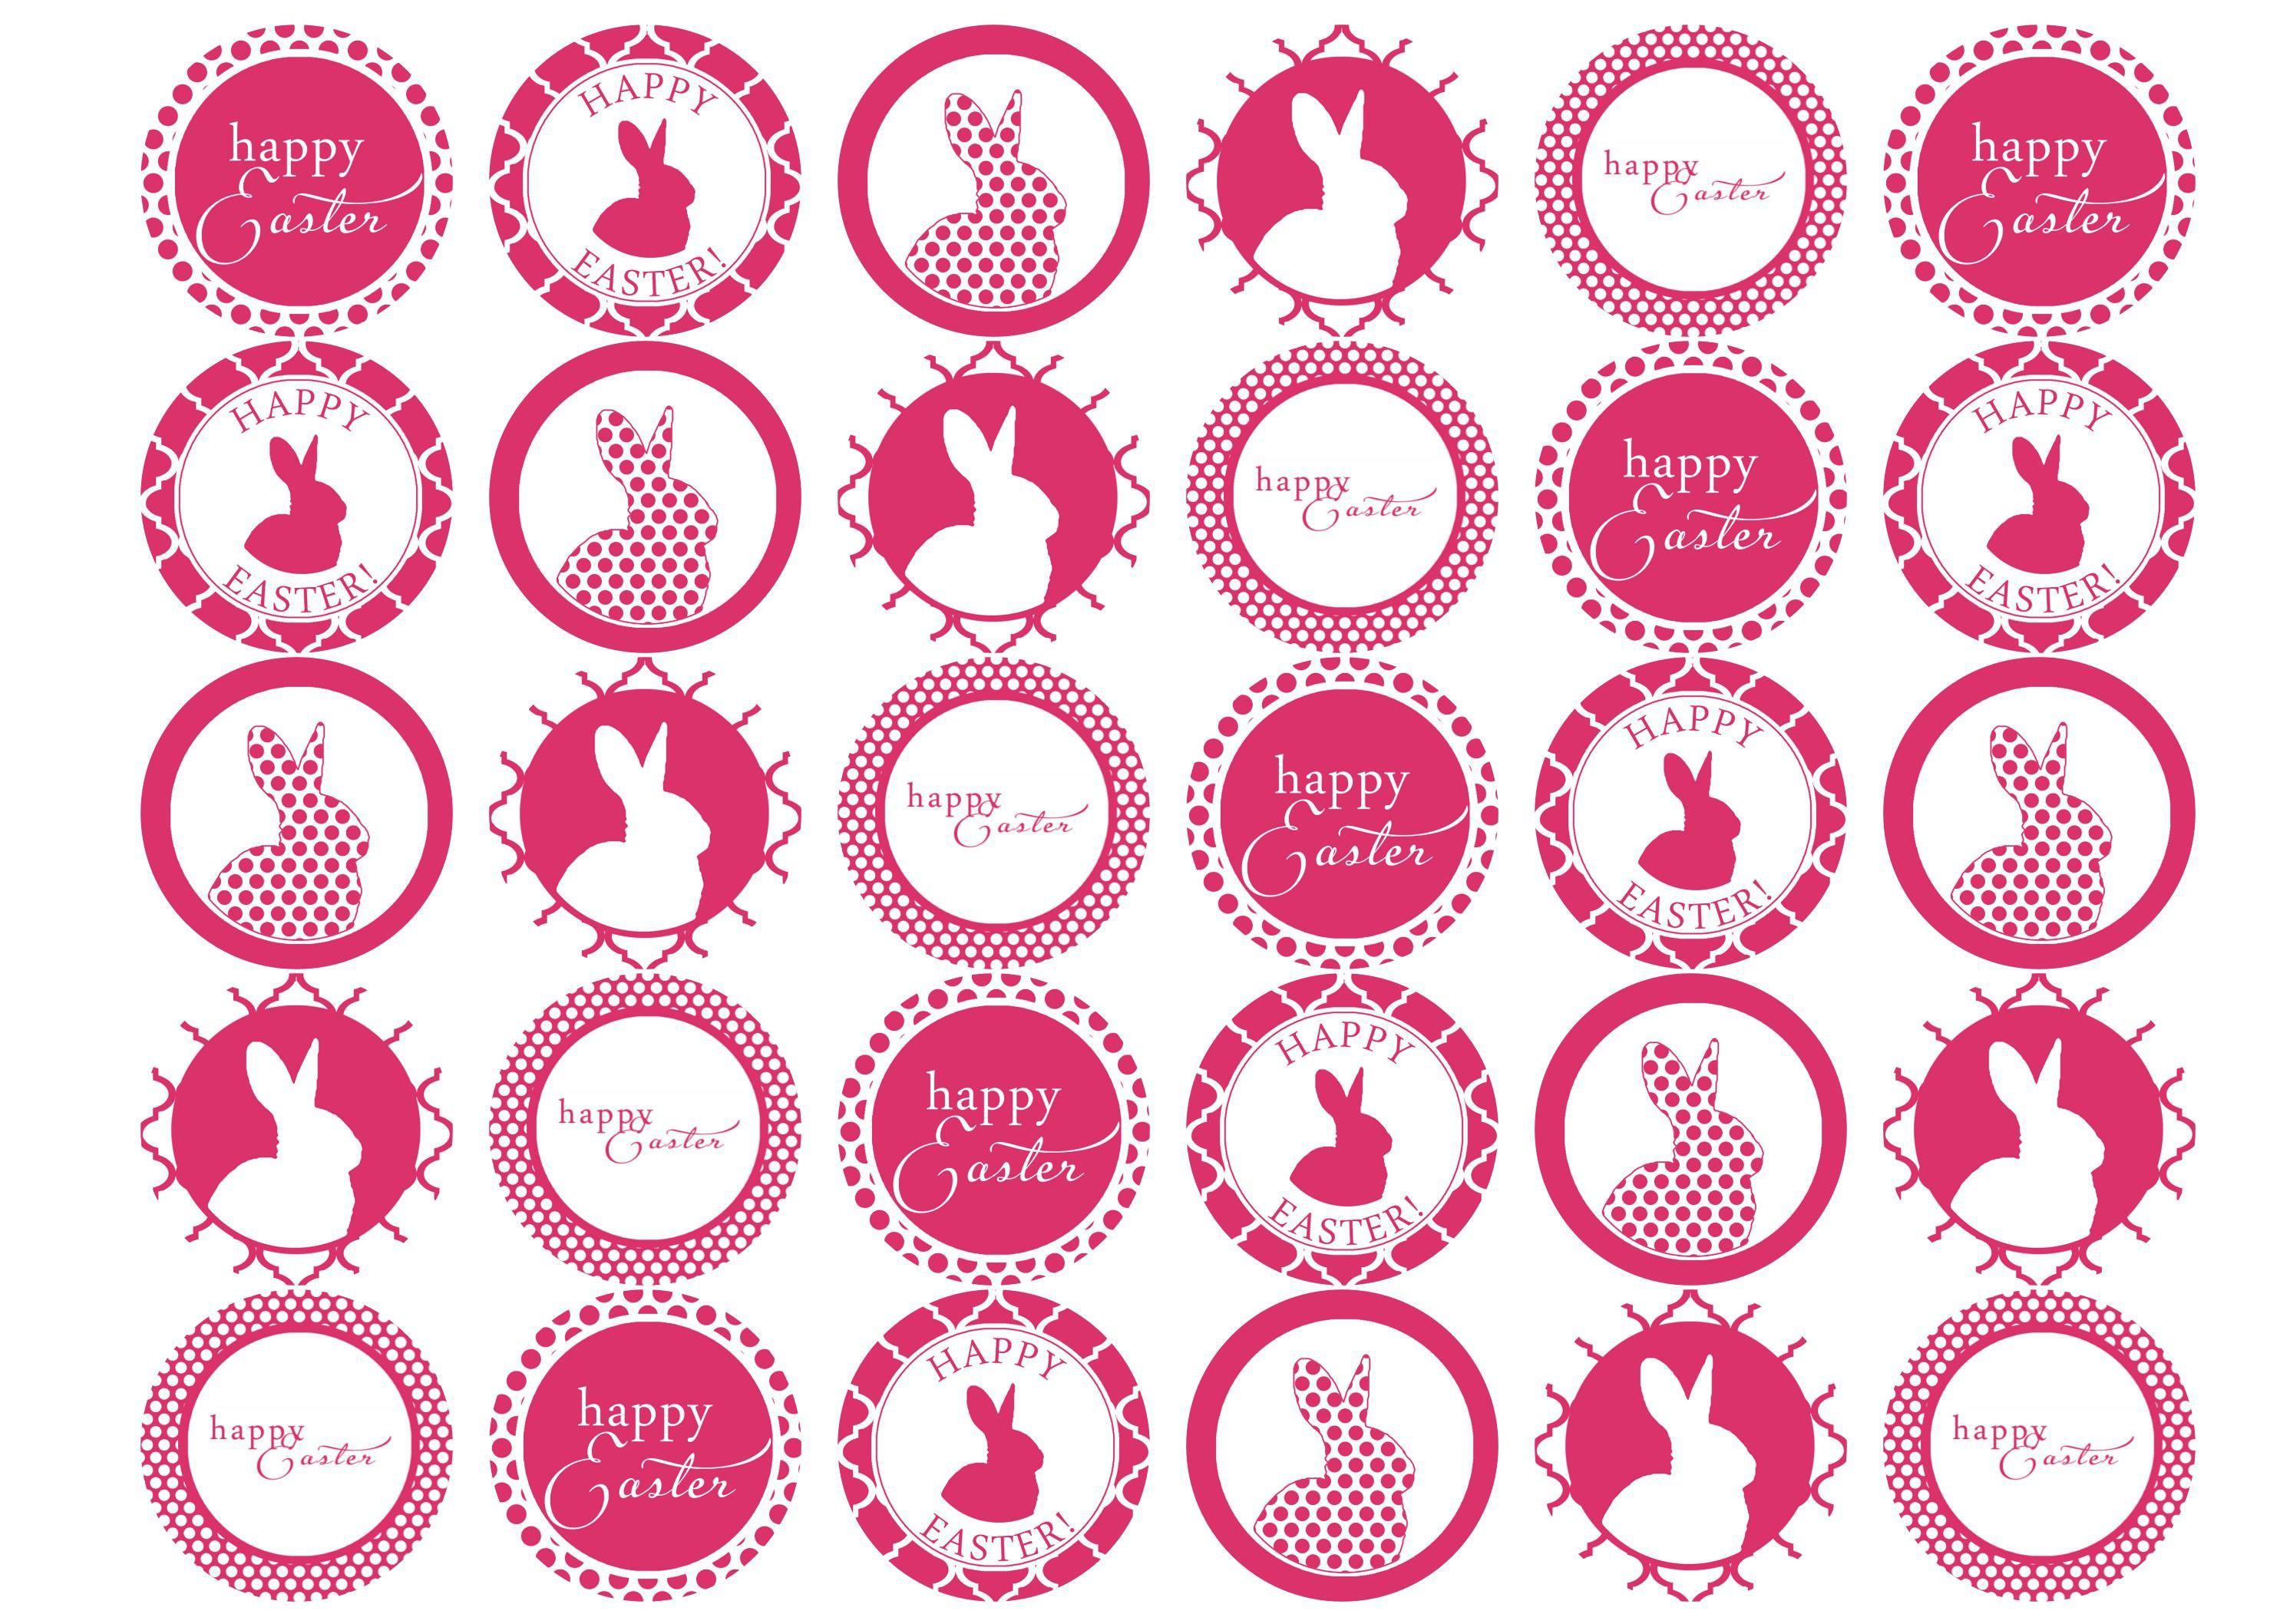 30 edible cupcake toppers with easter bunny designs in hot pink